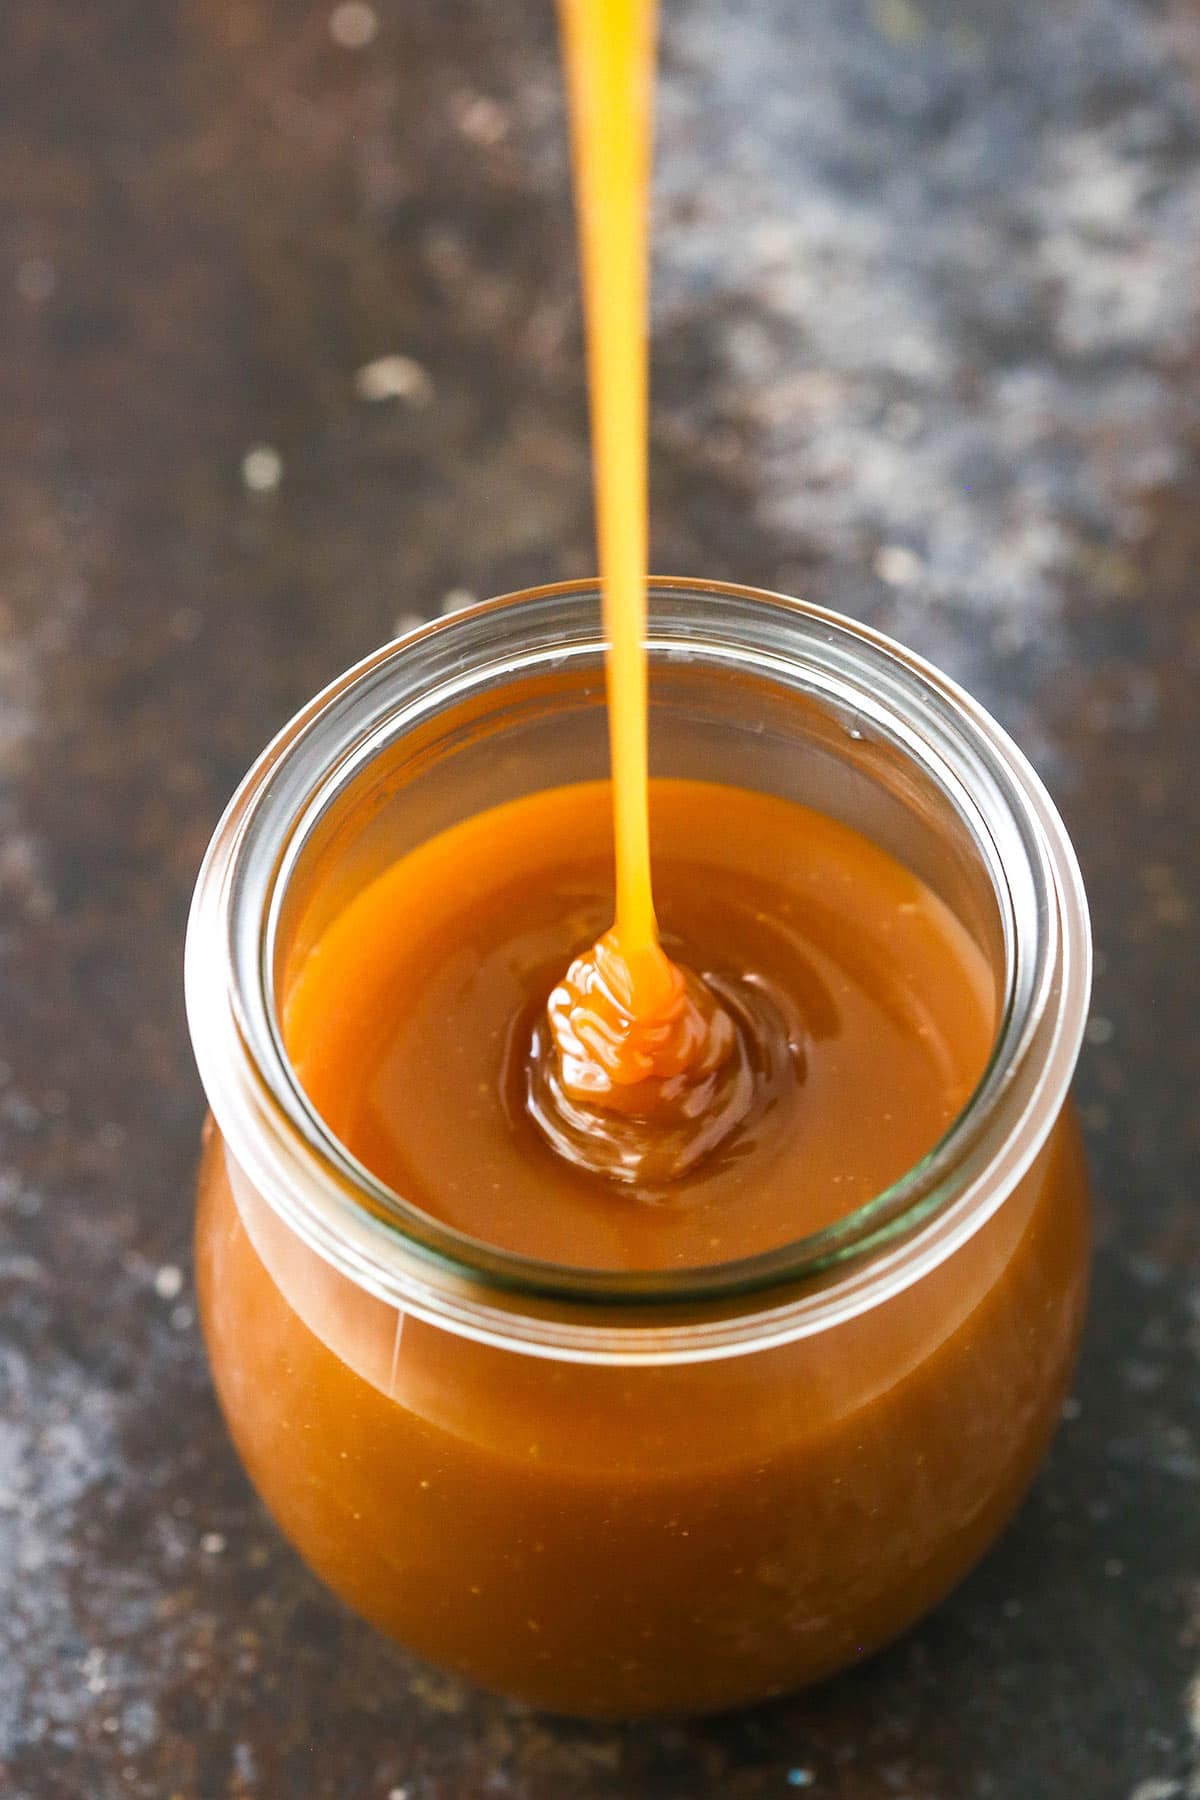 Overhead image of caramel sauce being drizzled into a jar.